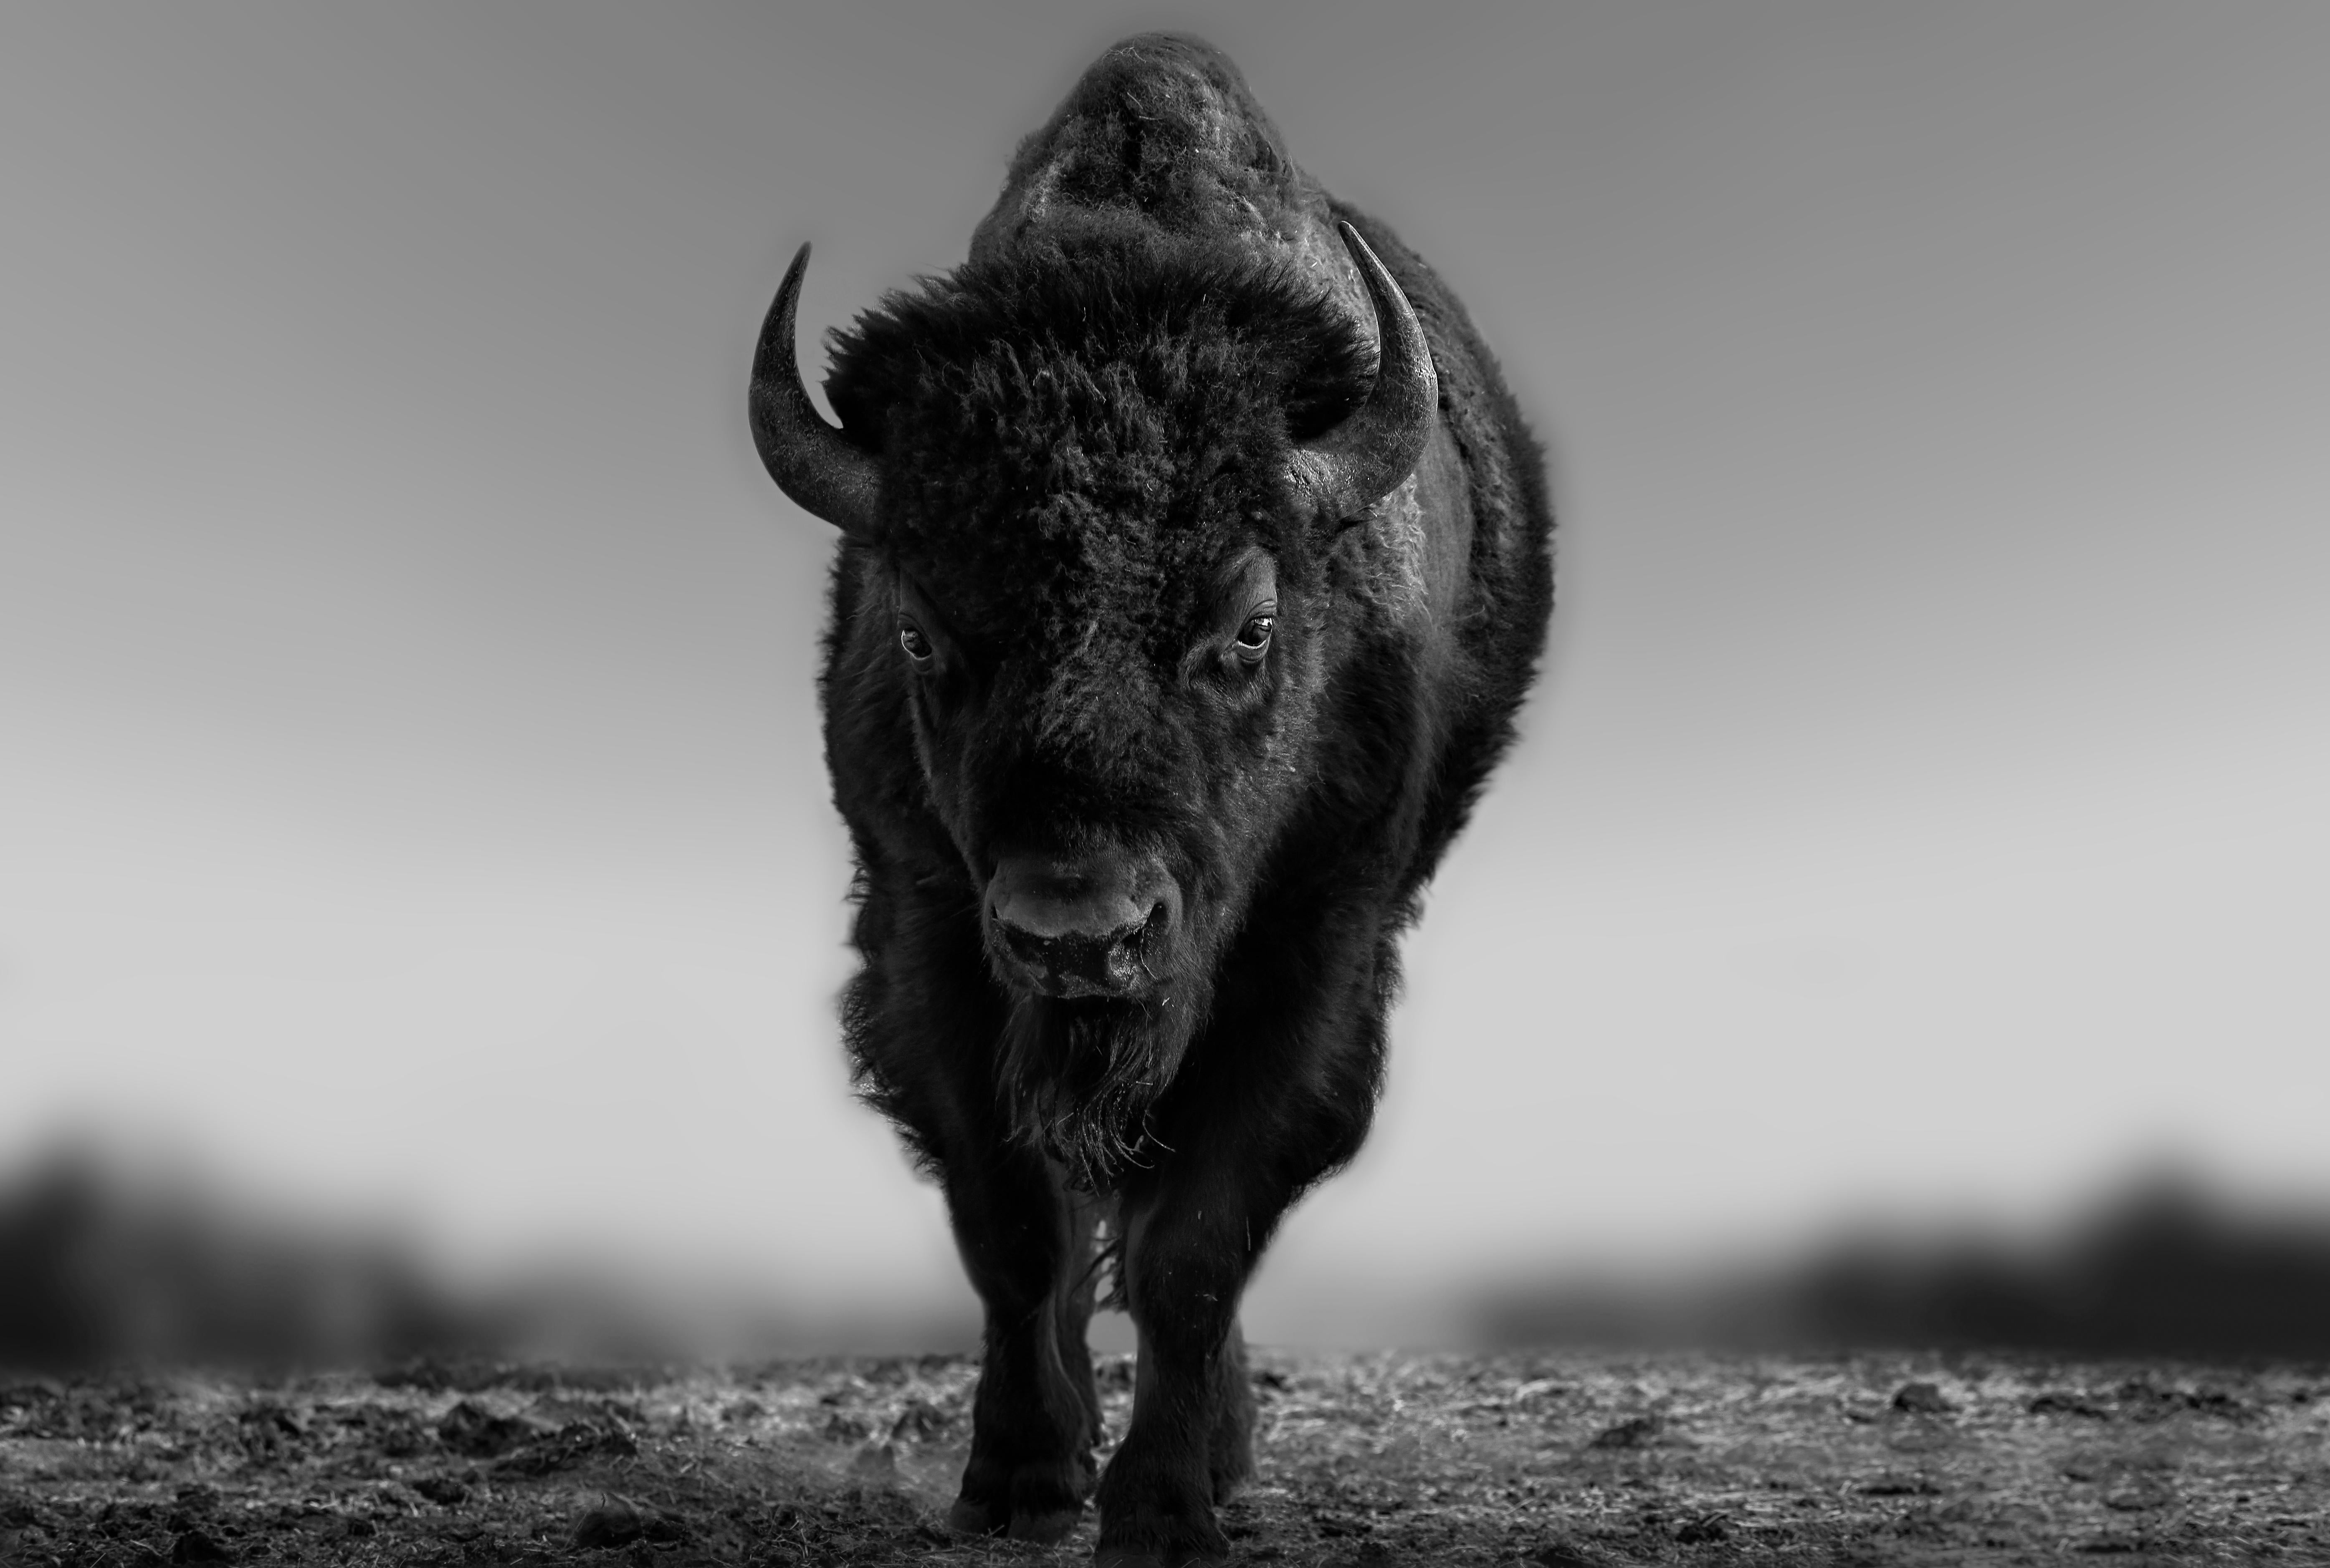 This is a contemporary photograph of an American Bison.  
Edition of 10. 
Signed and numbered 
Printed on archival paper and using archival inks
Framing available. Inquire for rates.   

 Shane Russeck has built a reputation for capturing America's